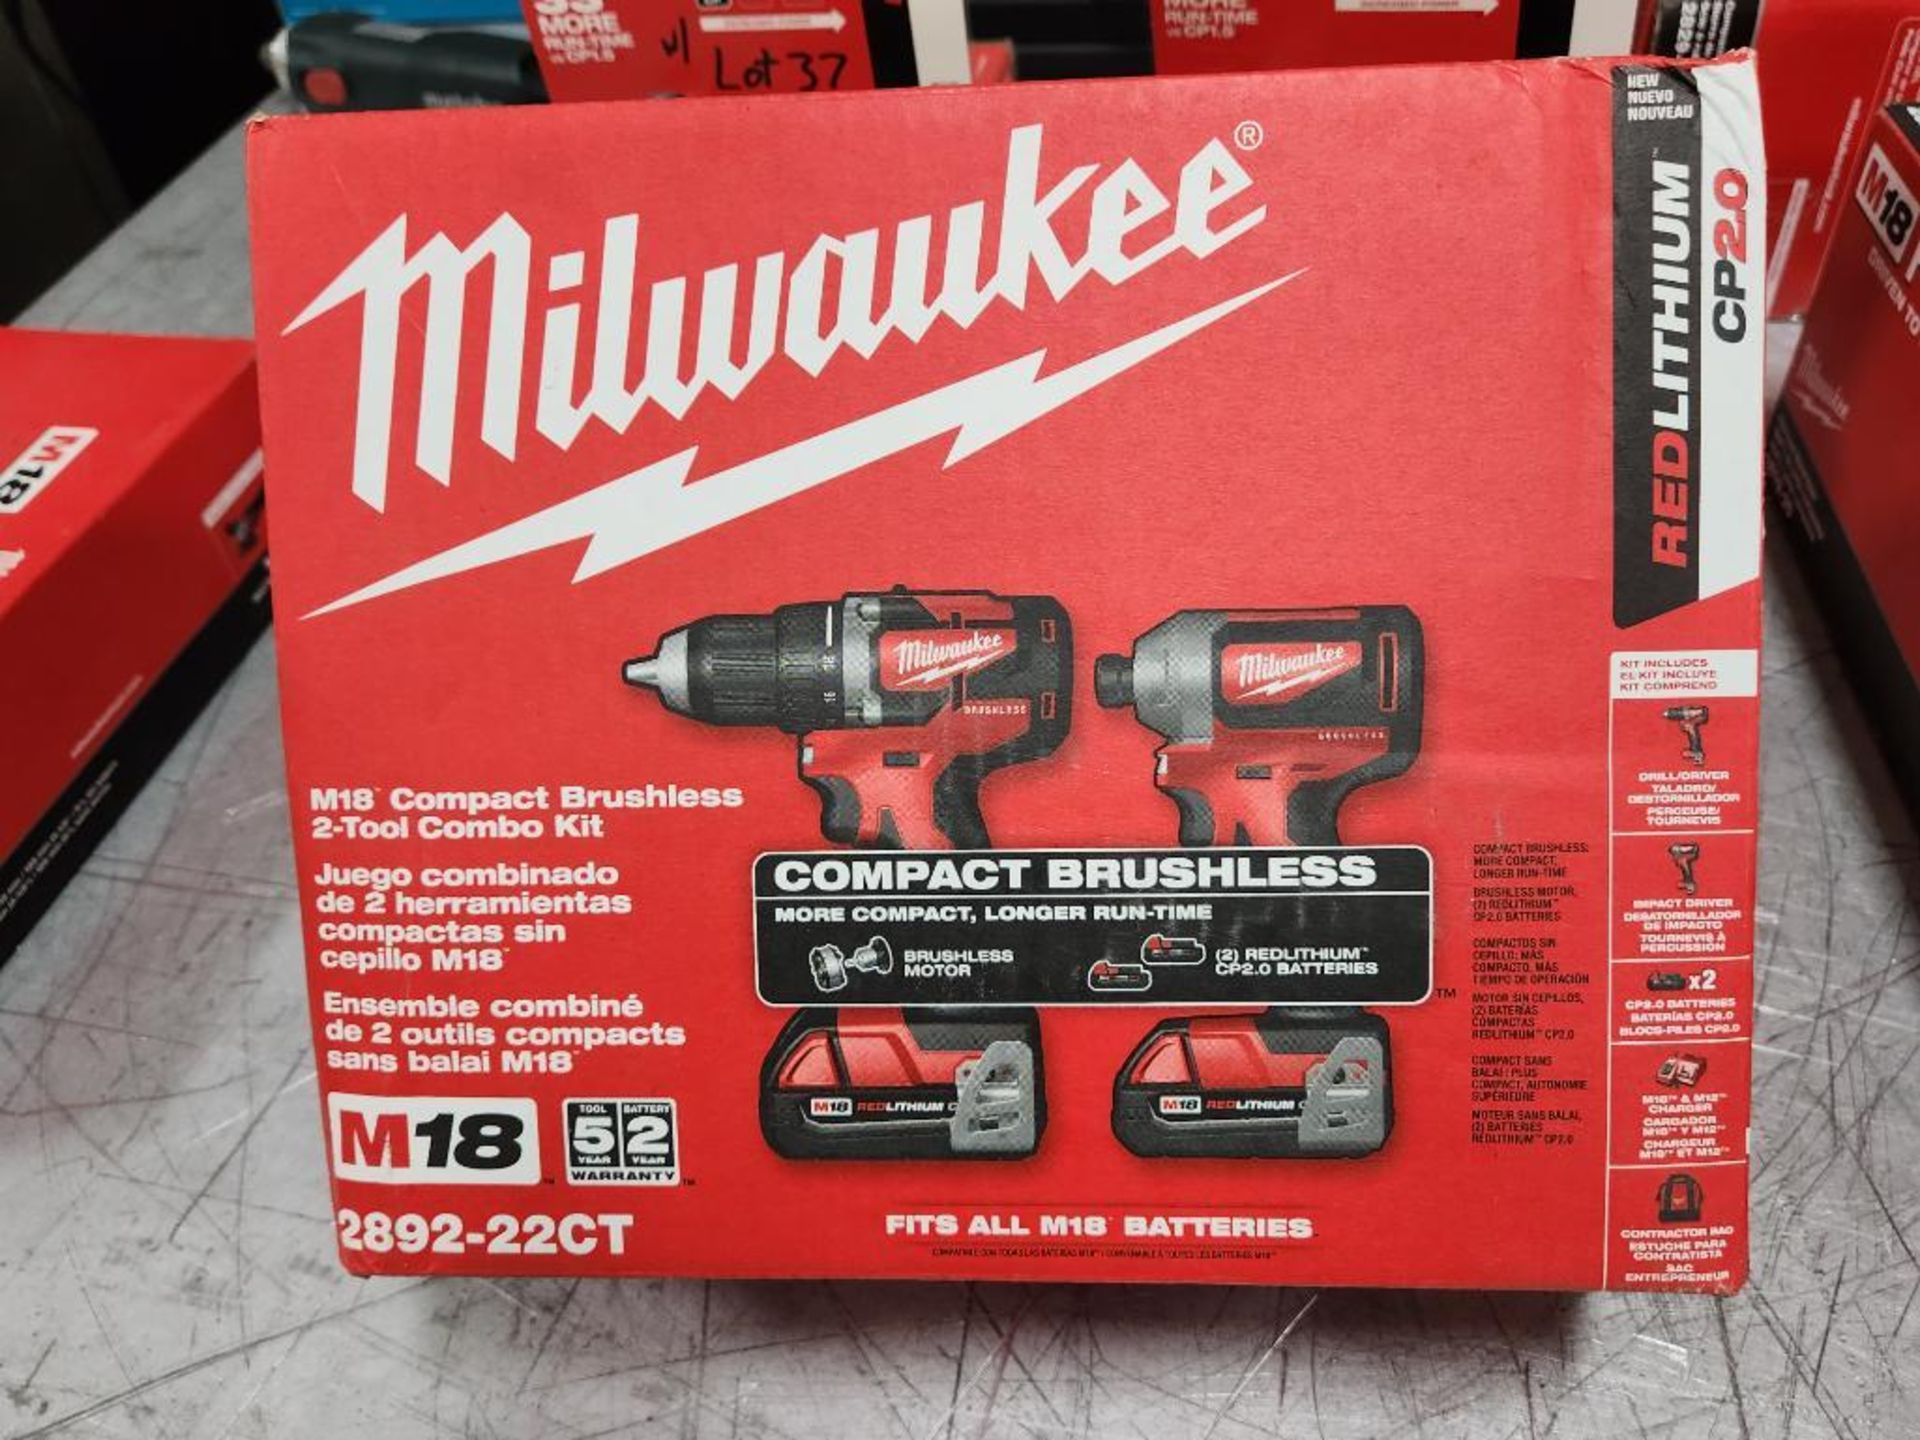 Milwaukee M18 Compact Brushless 2-Tool Combo Kit, (New) Drill & Impact Driver, Cordless, Model 2850-